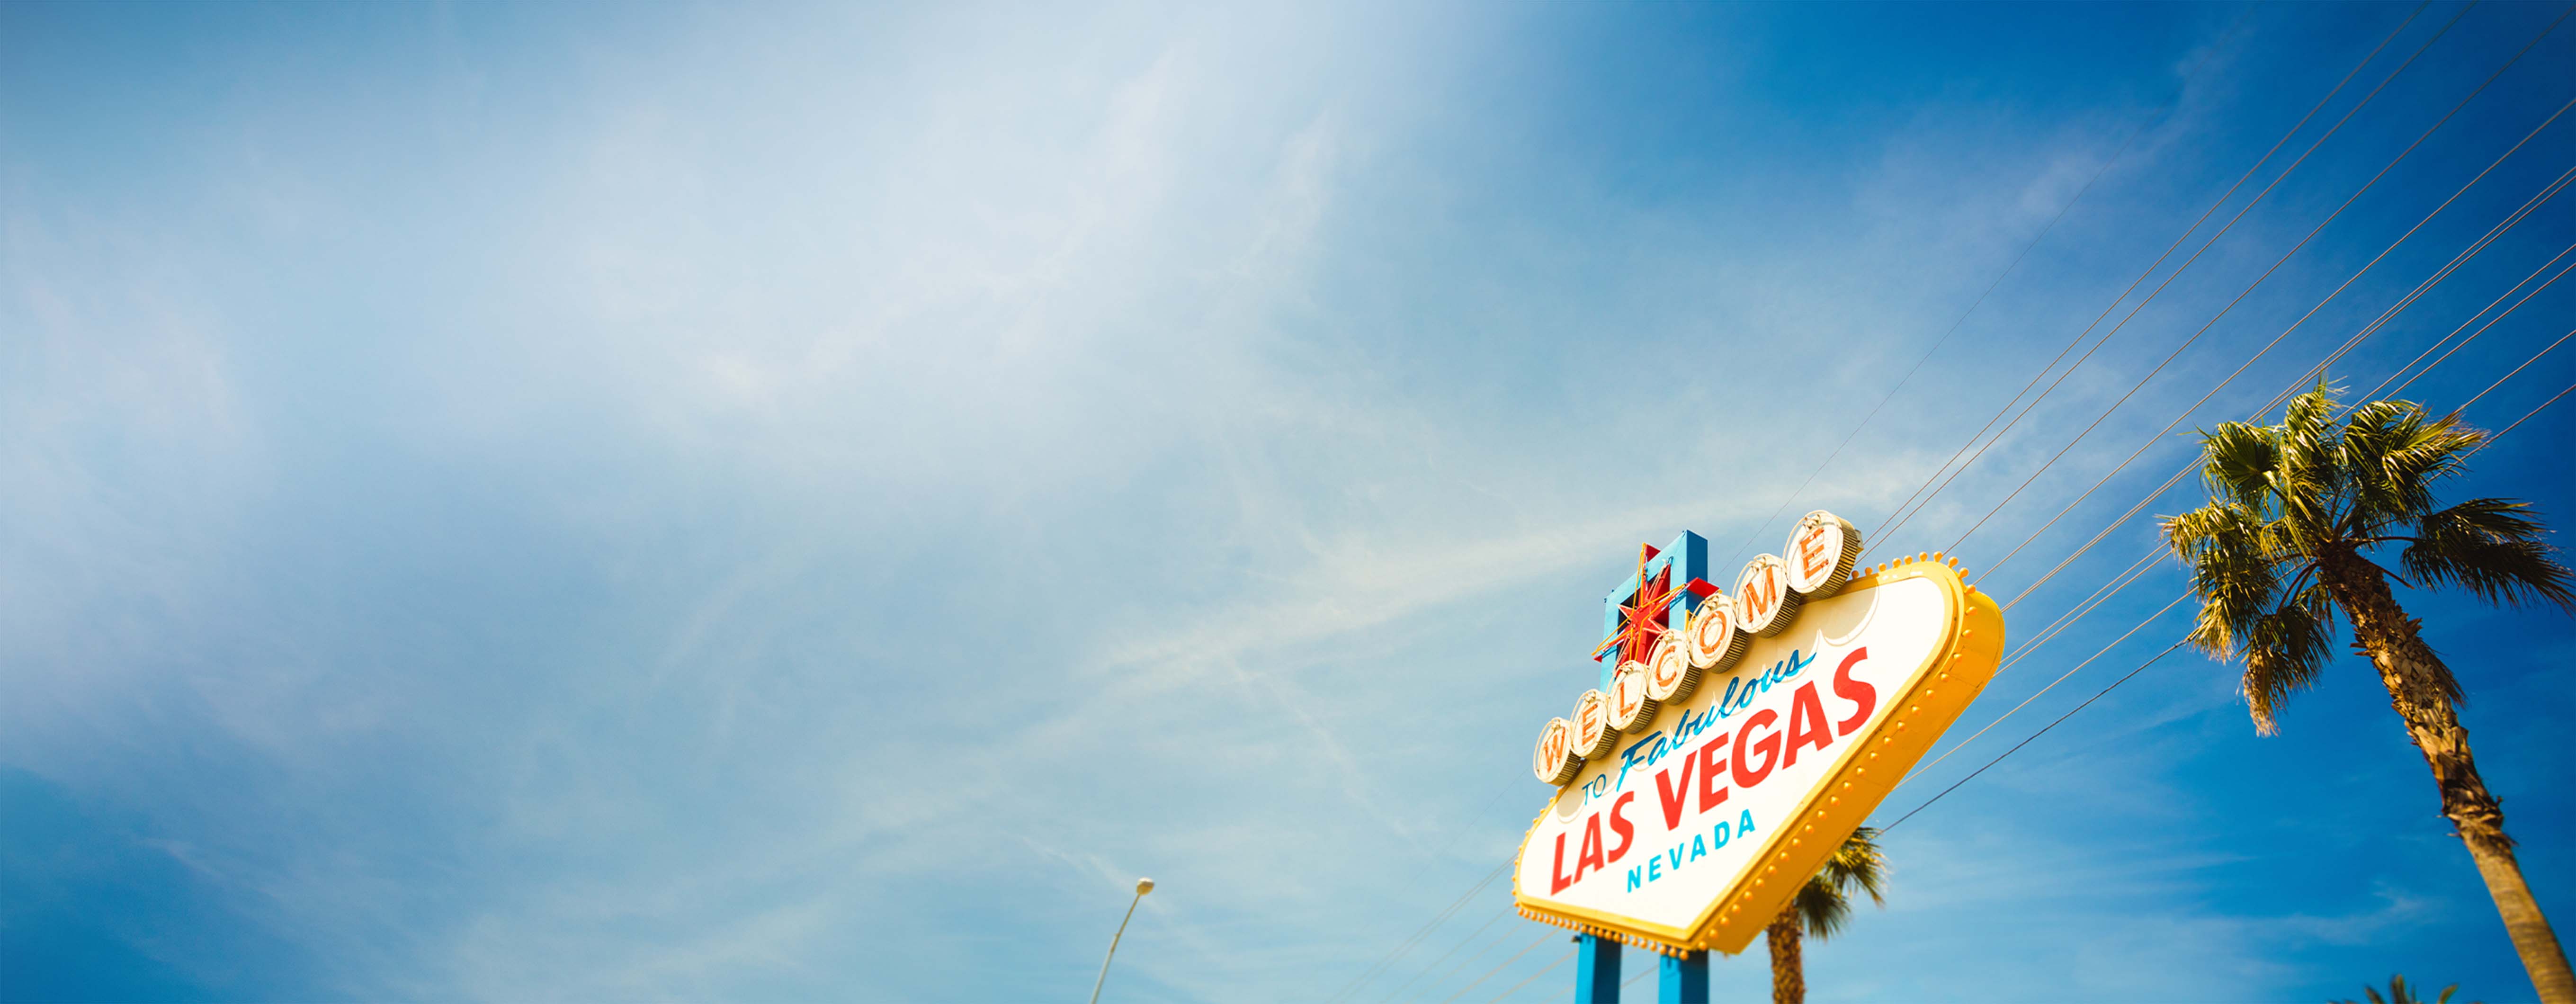 Image of a las vegas sign with a blue sky behind it